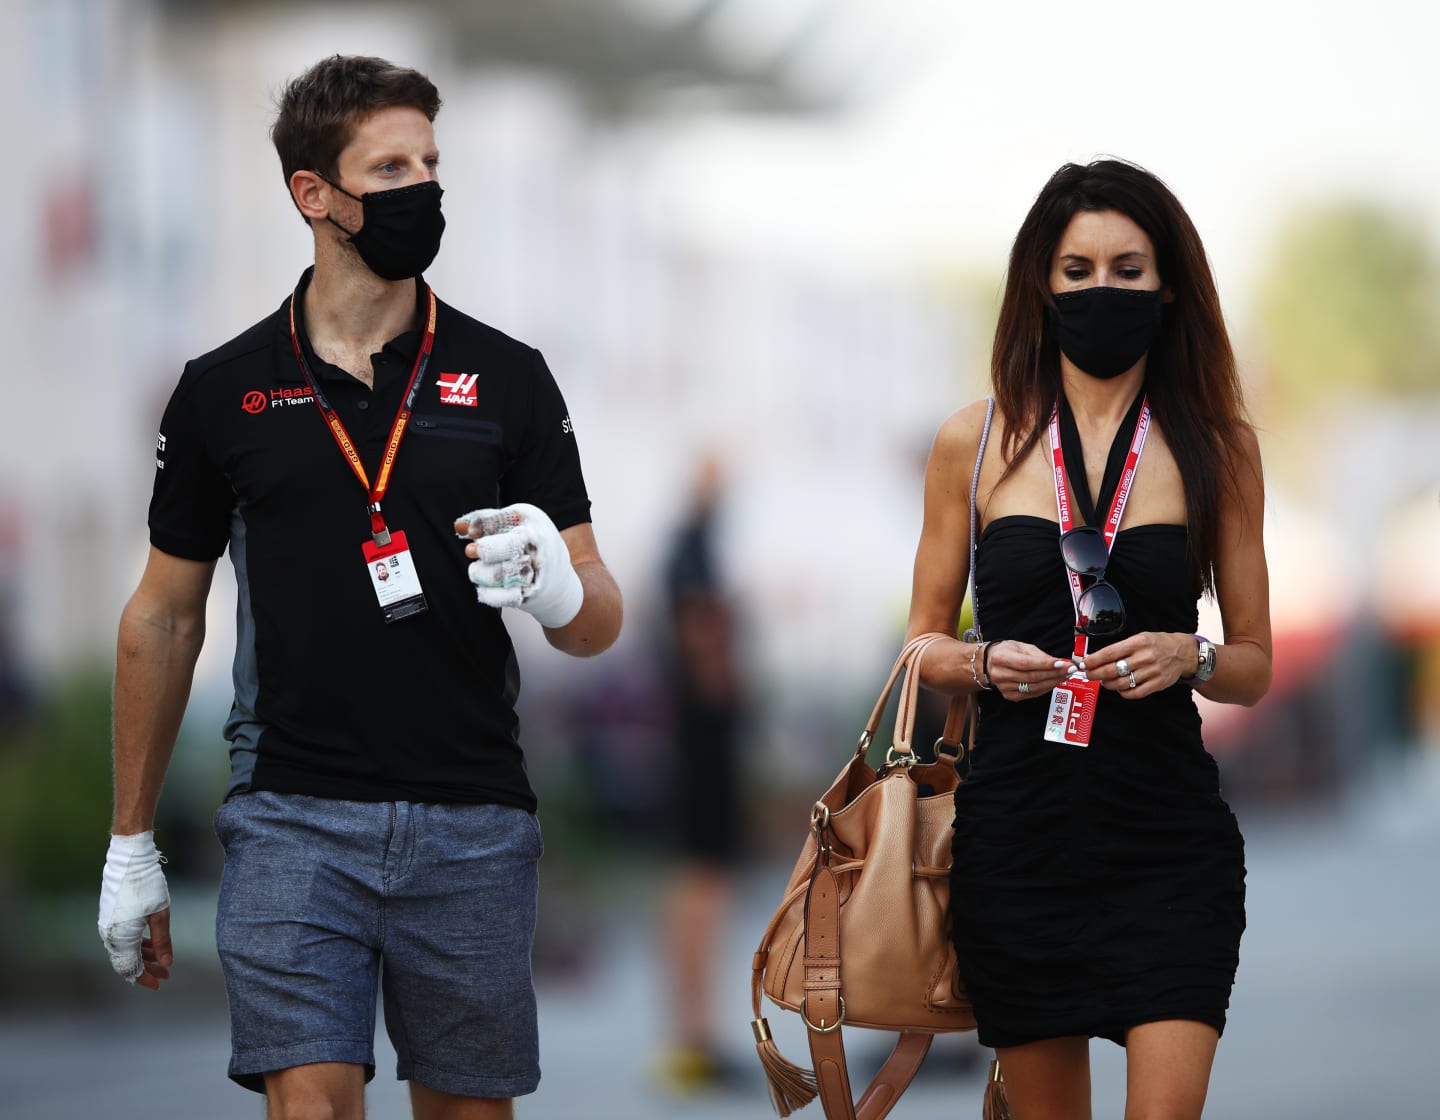 BAHRAIN, BAHRAIN - DECEMBER 05: Romain Grosjean of France and Haas F1 walks in the Paddock with his